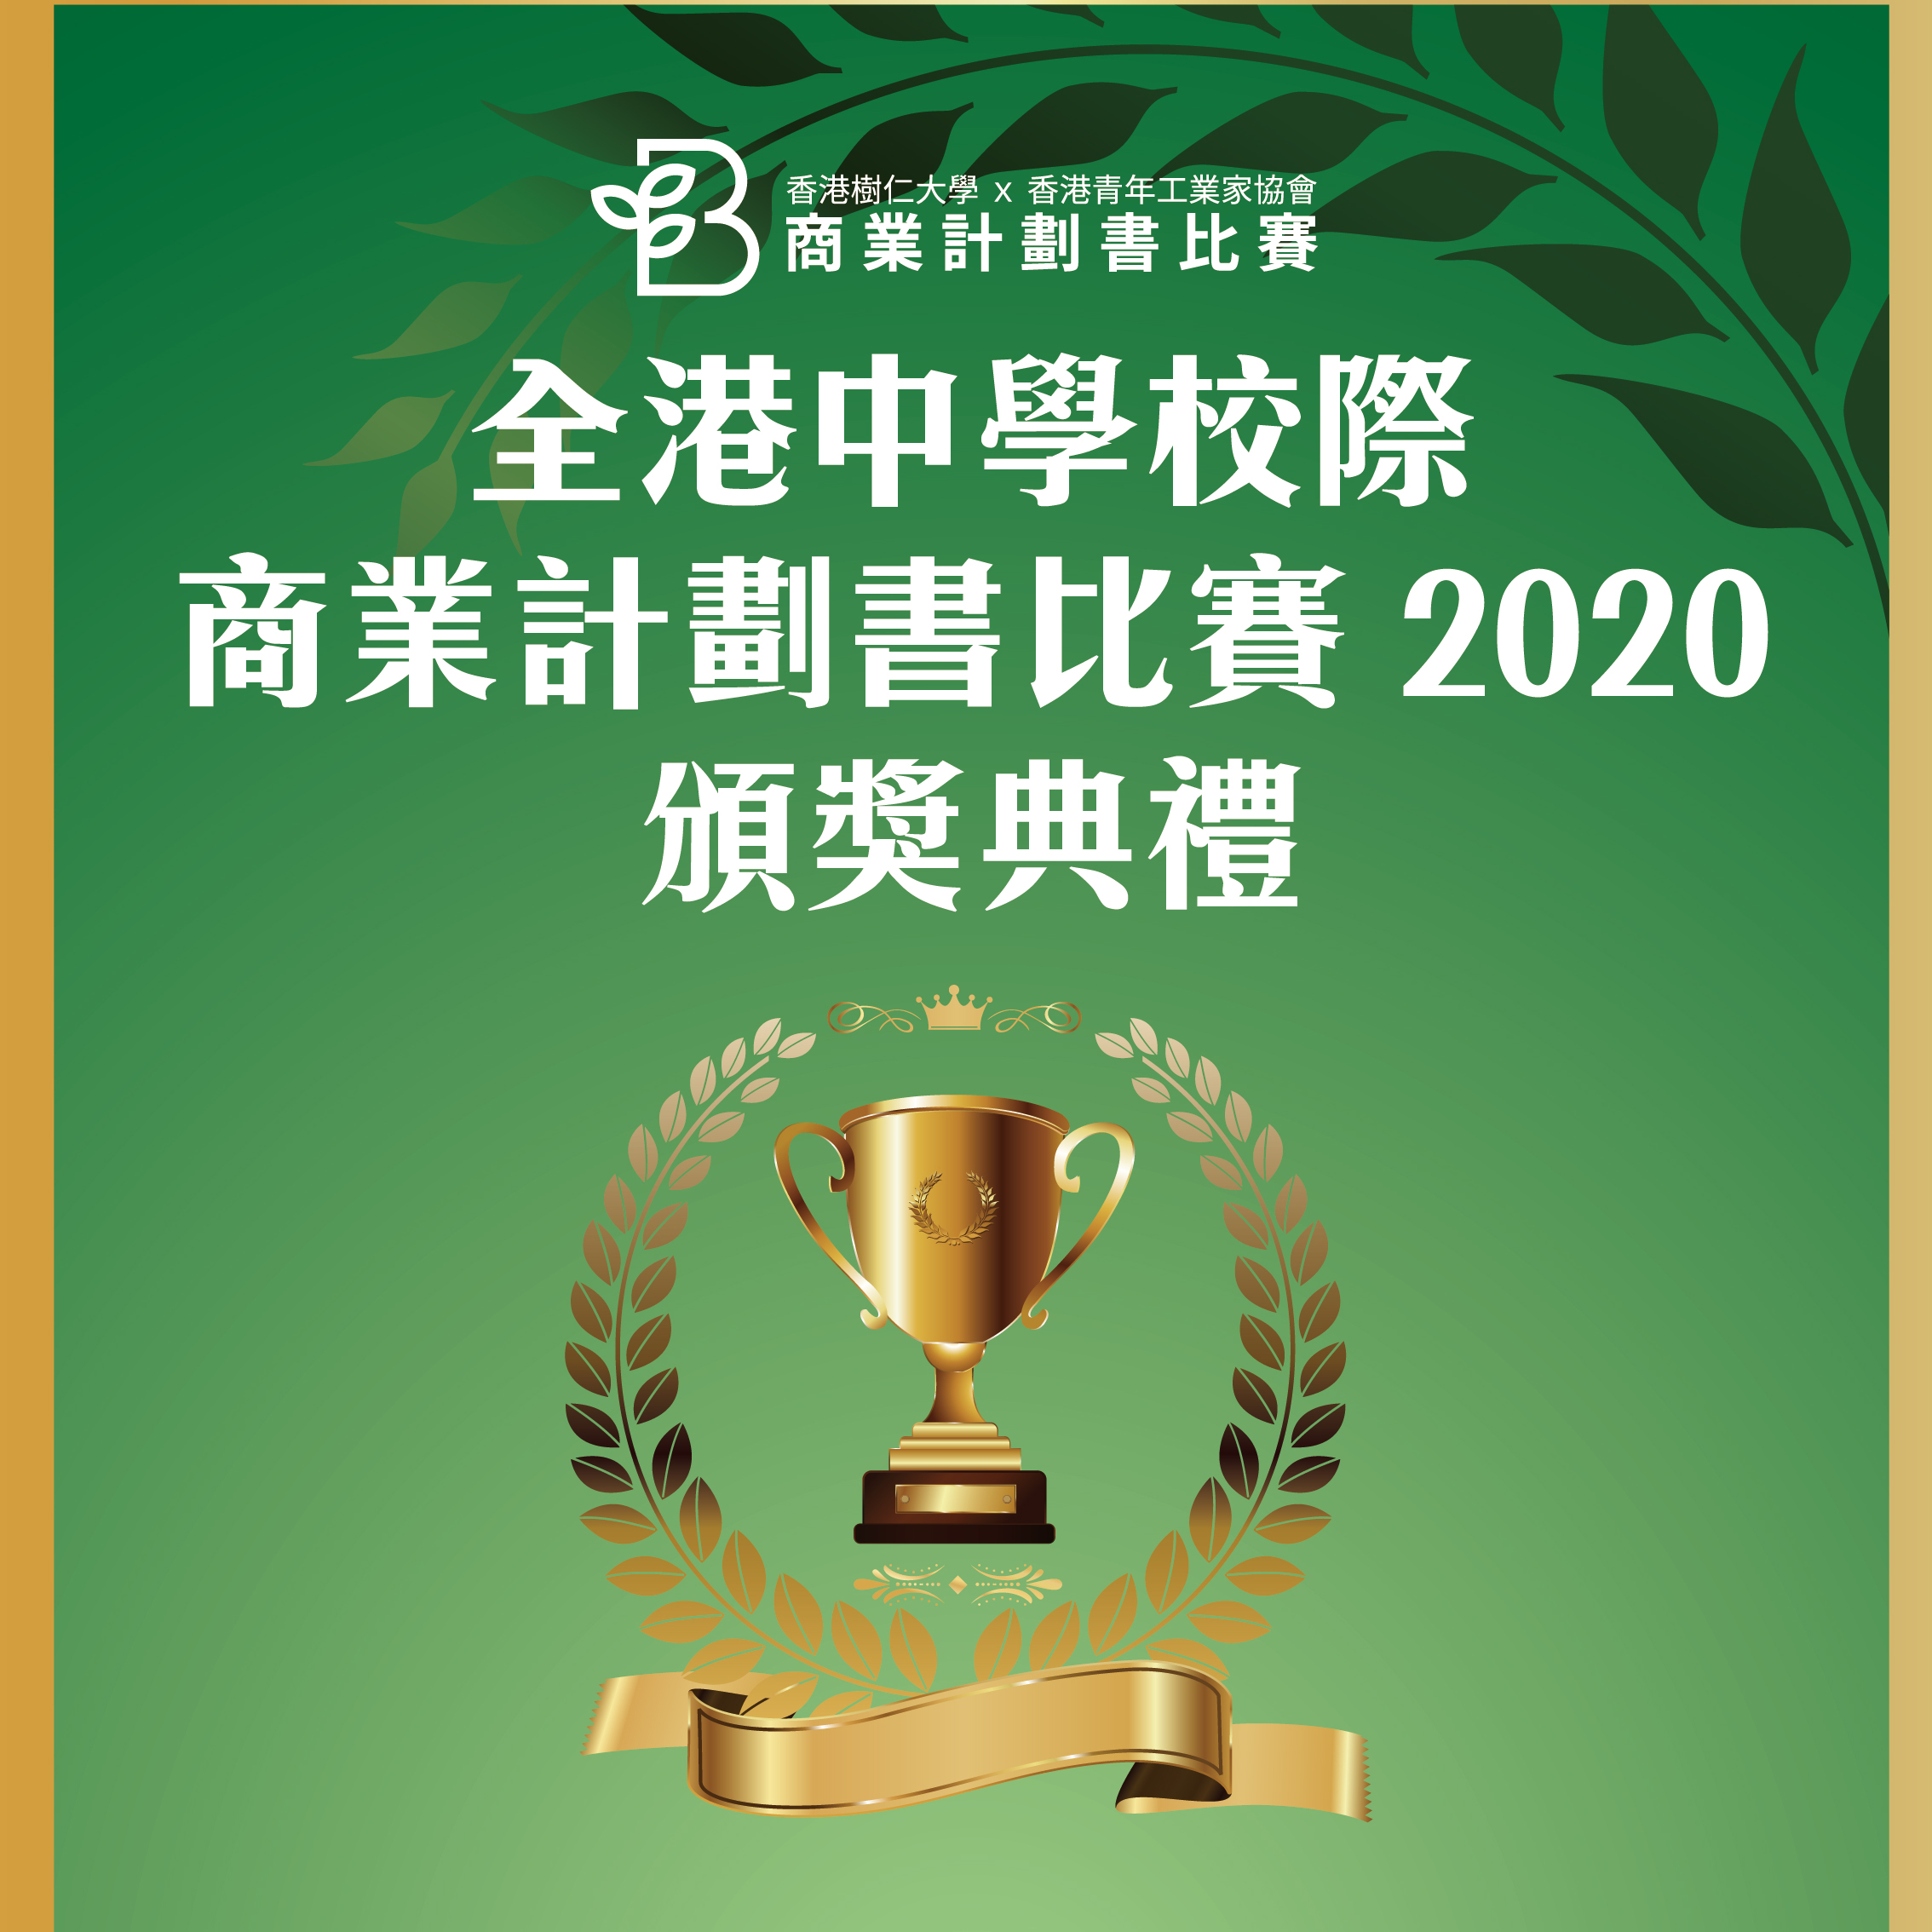 SYU x YICY Business Proposal Competition Award Ceremony 2020